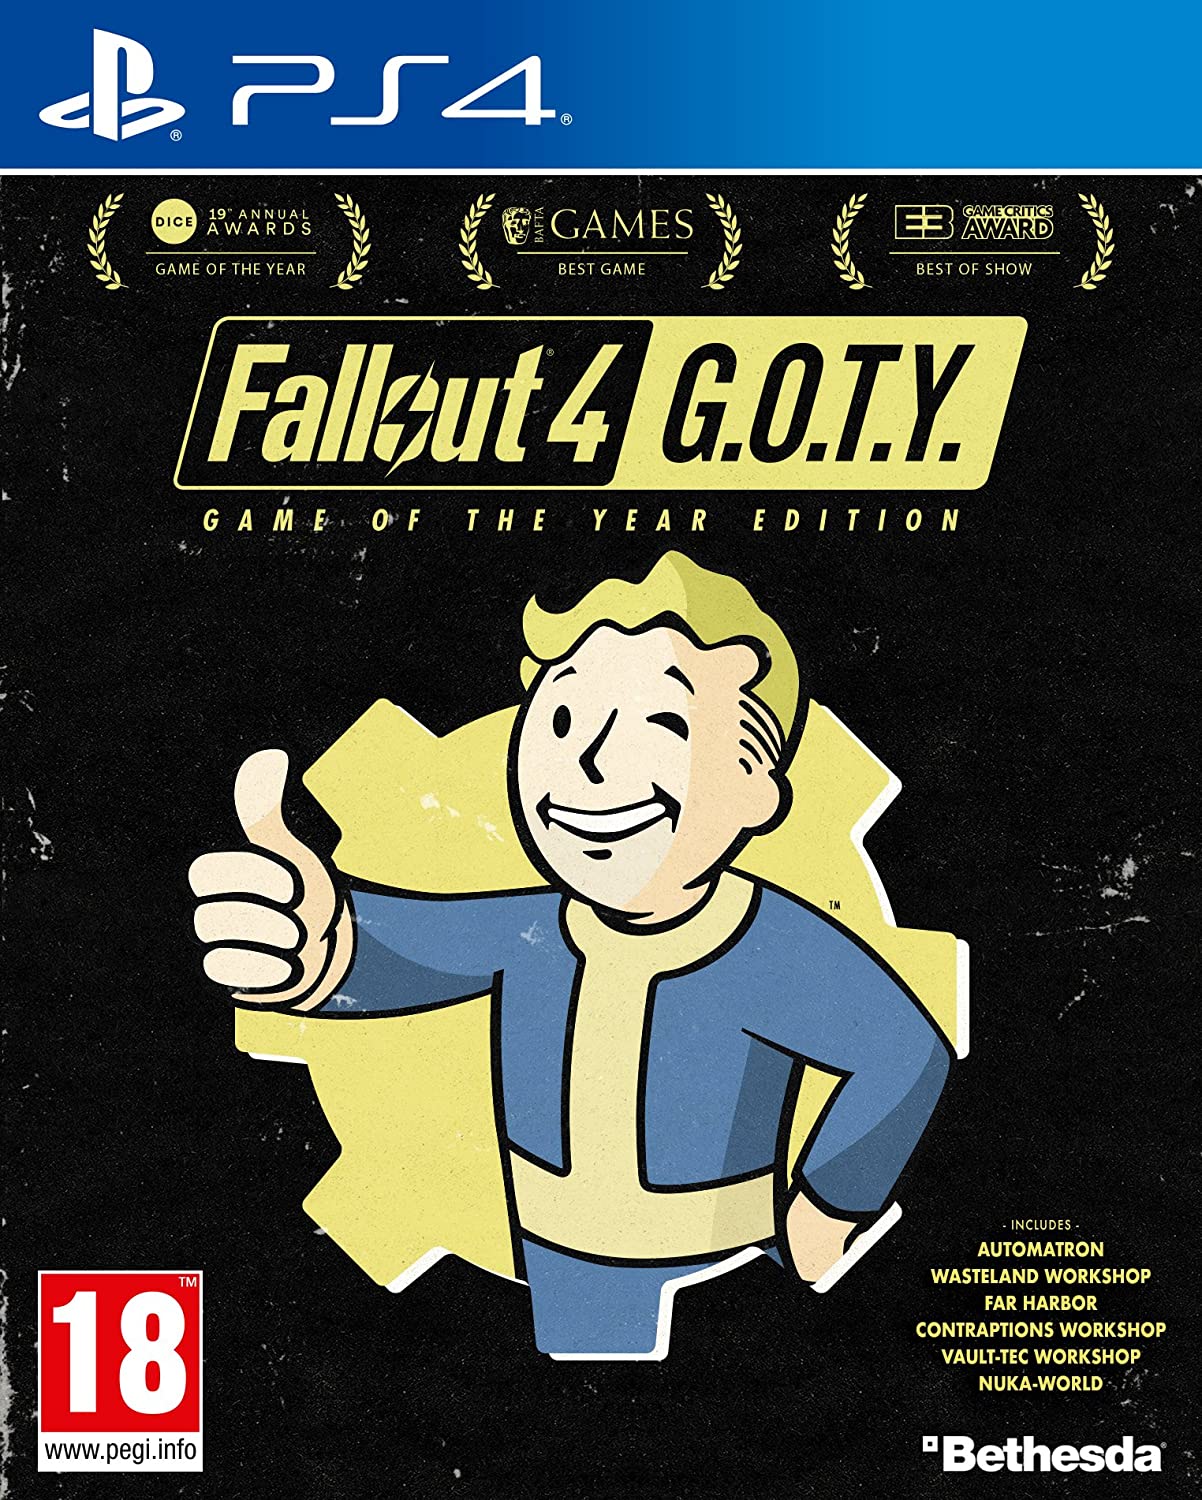 Fallout 4 GOTY - Game of The Year Edition - PS4